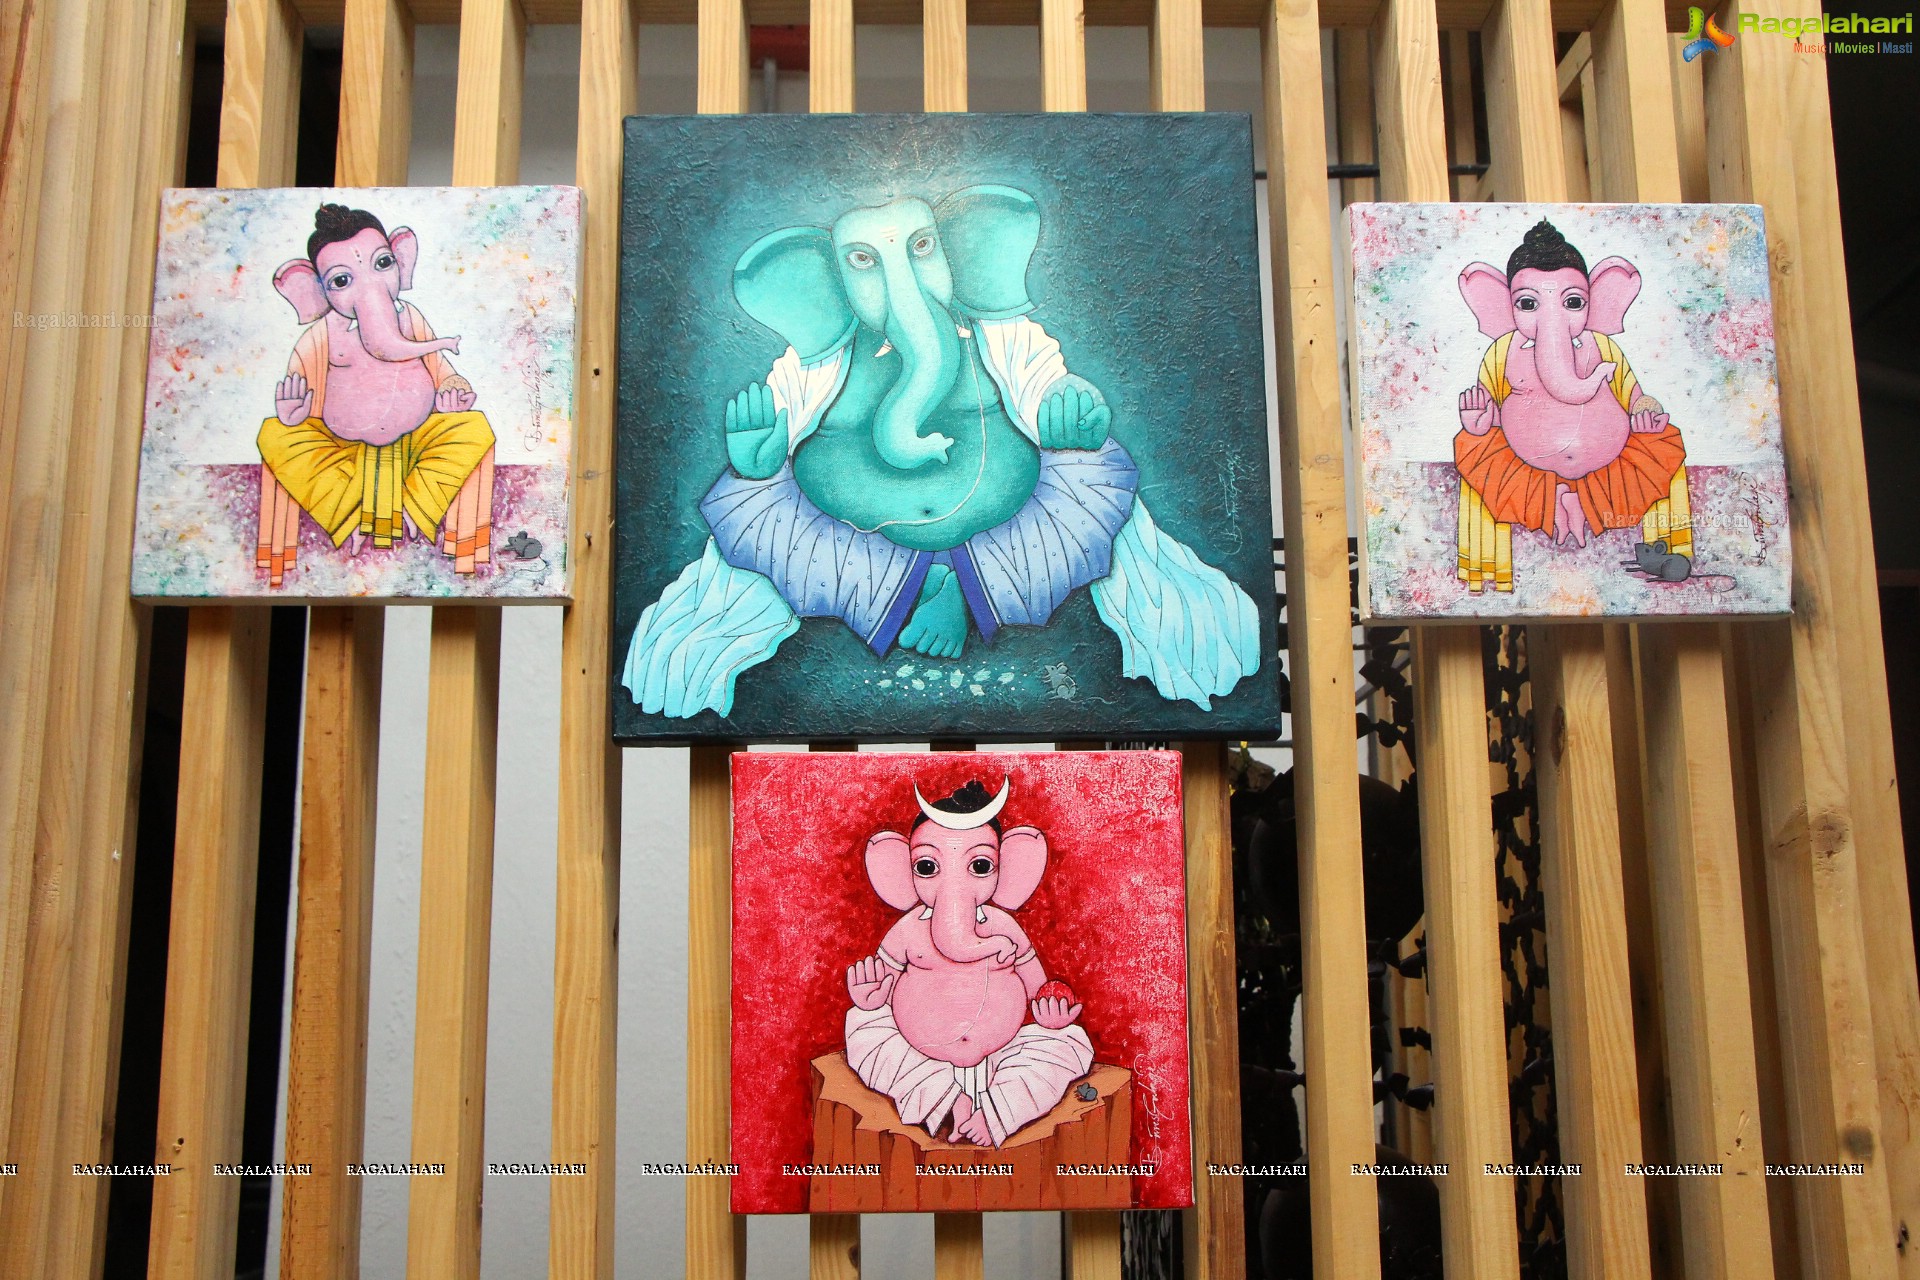 Lord Ganesh in Different Hues at The Gallery Cafe by Bala Bhakta Raju, Om Swami, Siva Balan, Suresh Gulage and Vijay Belde